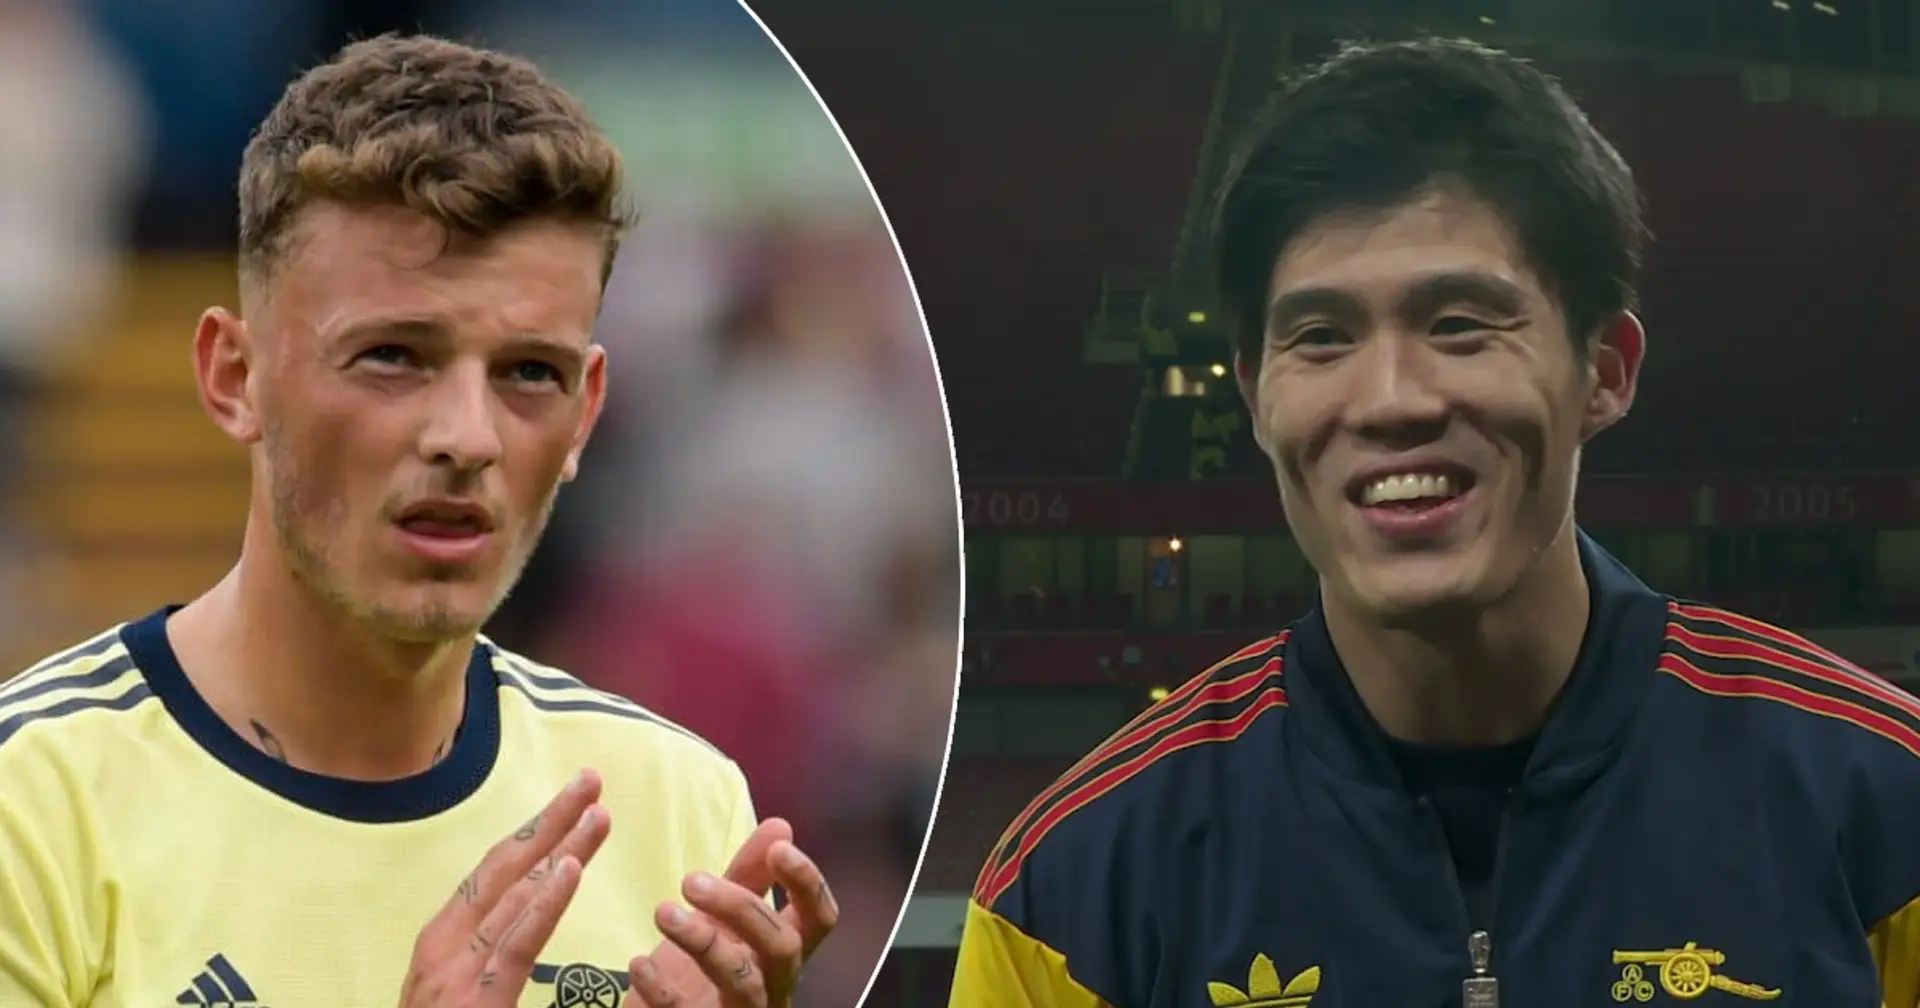 'At Arsenal, there's always competition': Tomiyasu eager to win right-back spot from Ben White